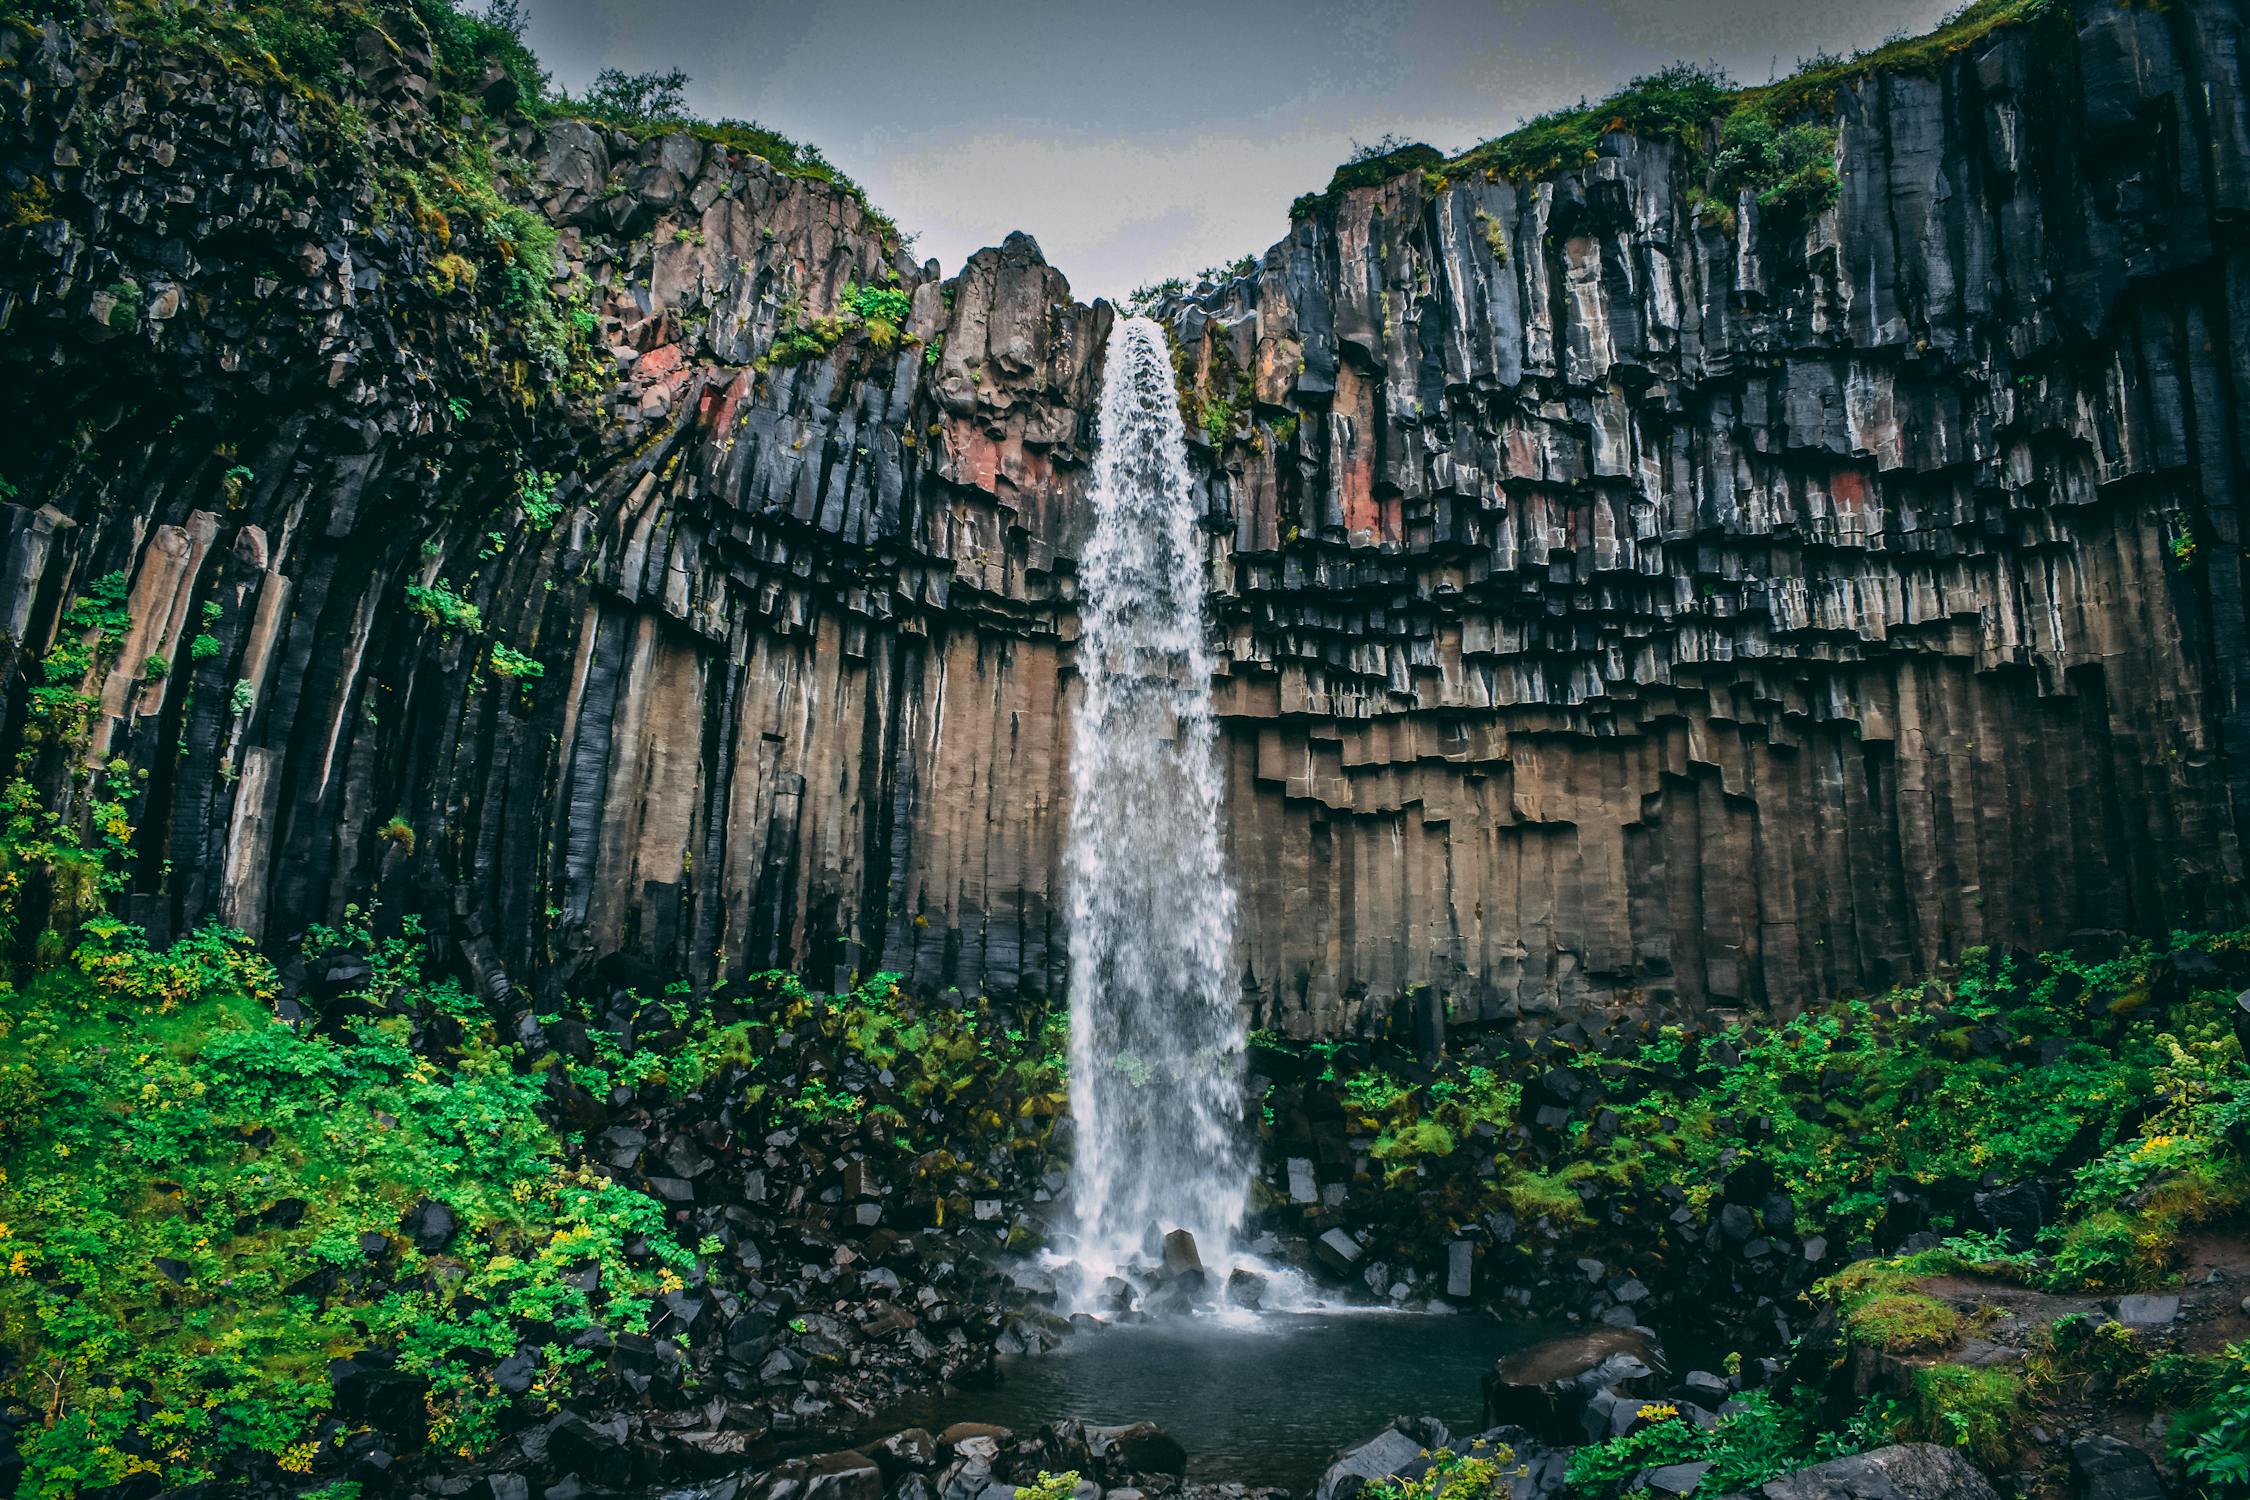 waterfalls Photo by Rudolf Kirchner from Pexels: https://www.pexels.com/photo/waterfall-surrounded-with-green-leaf-plant-view-831062/